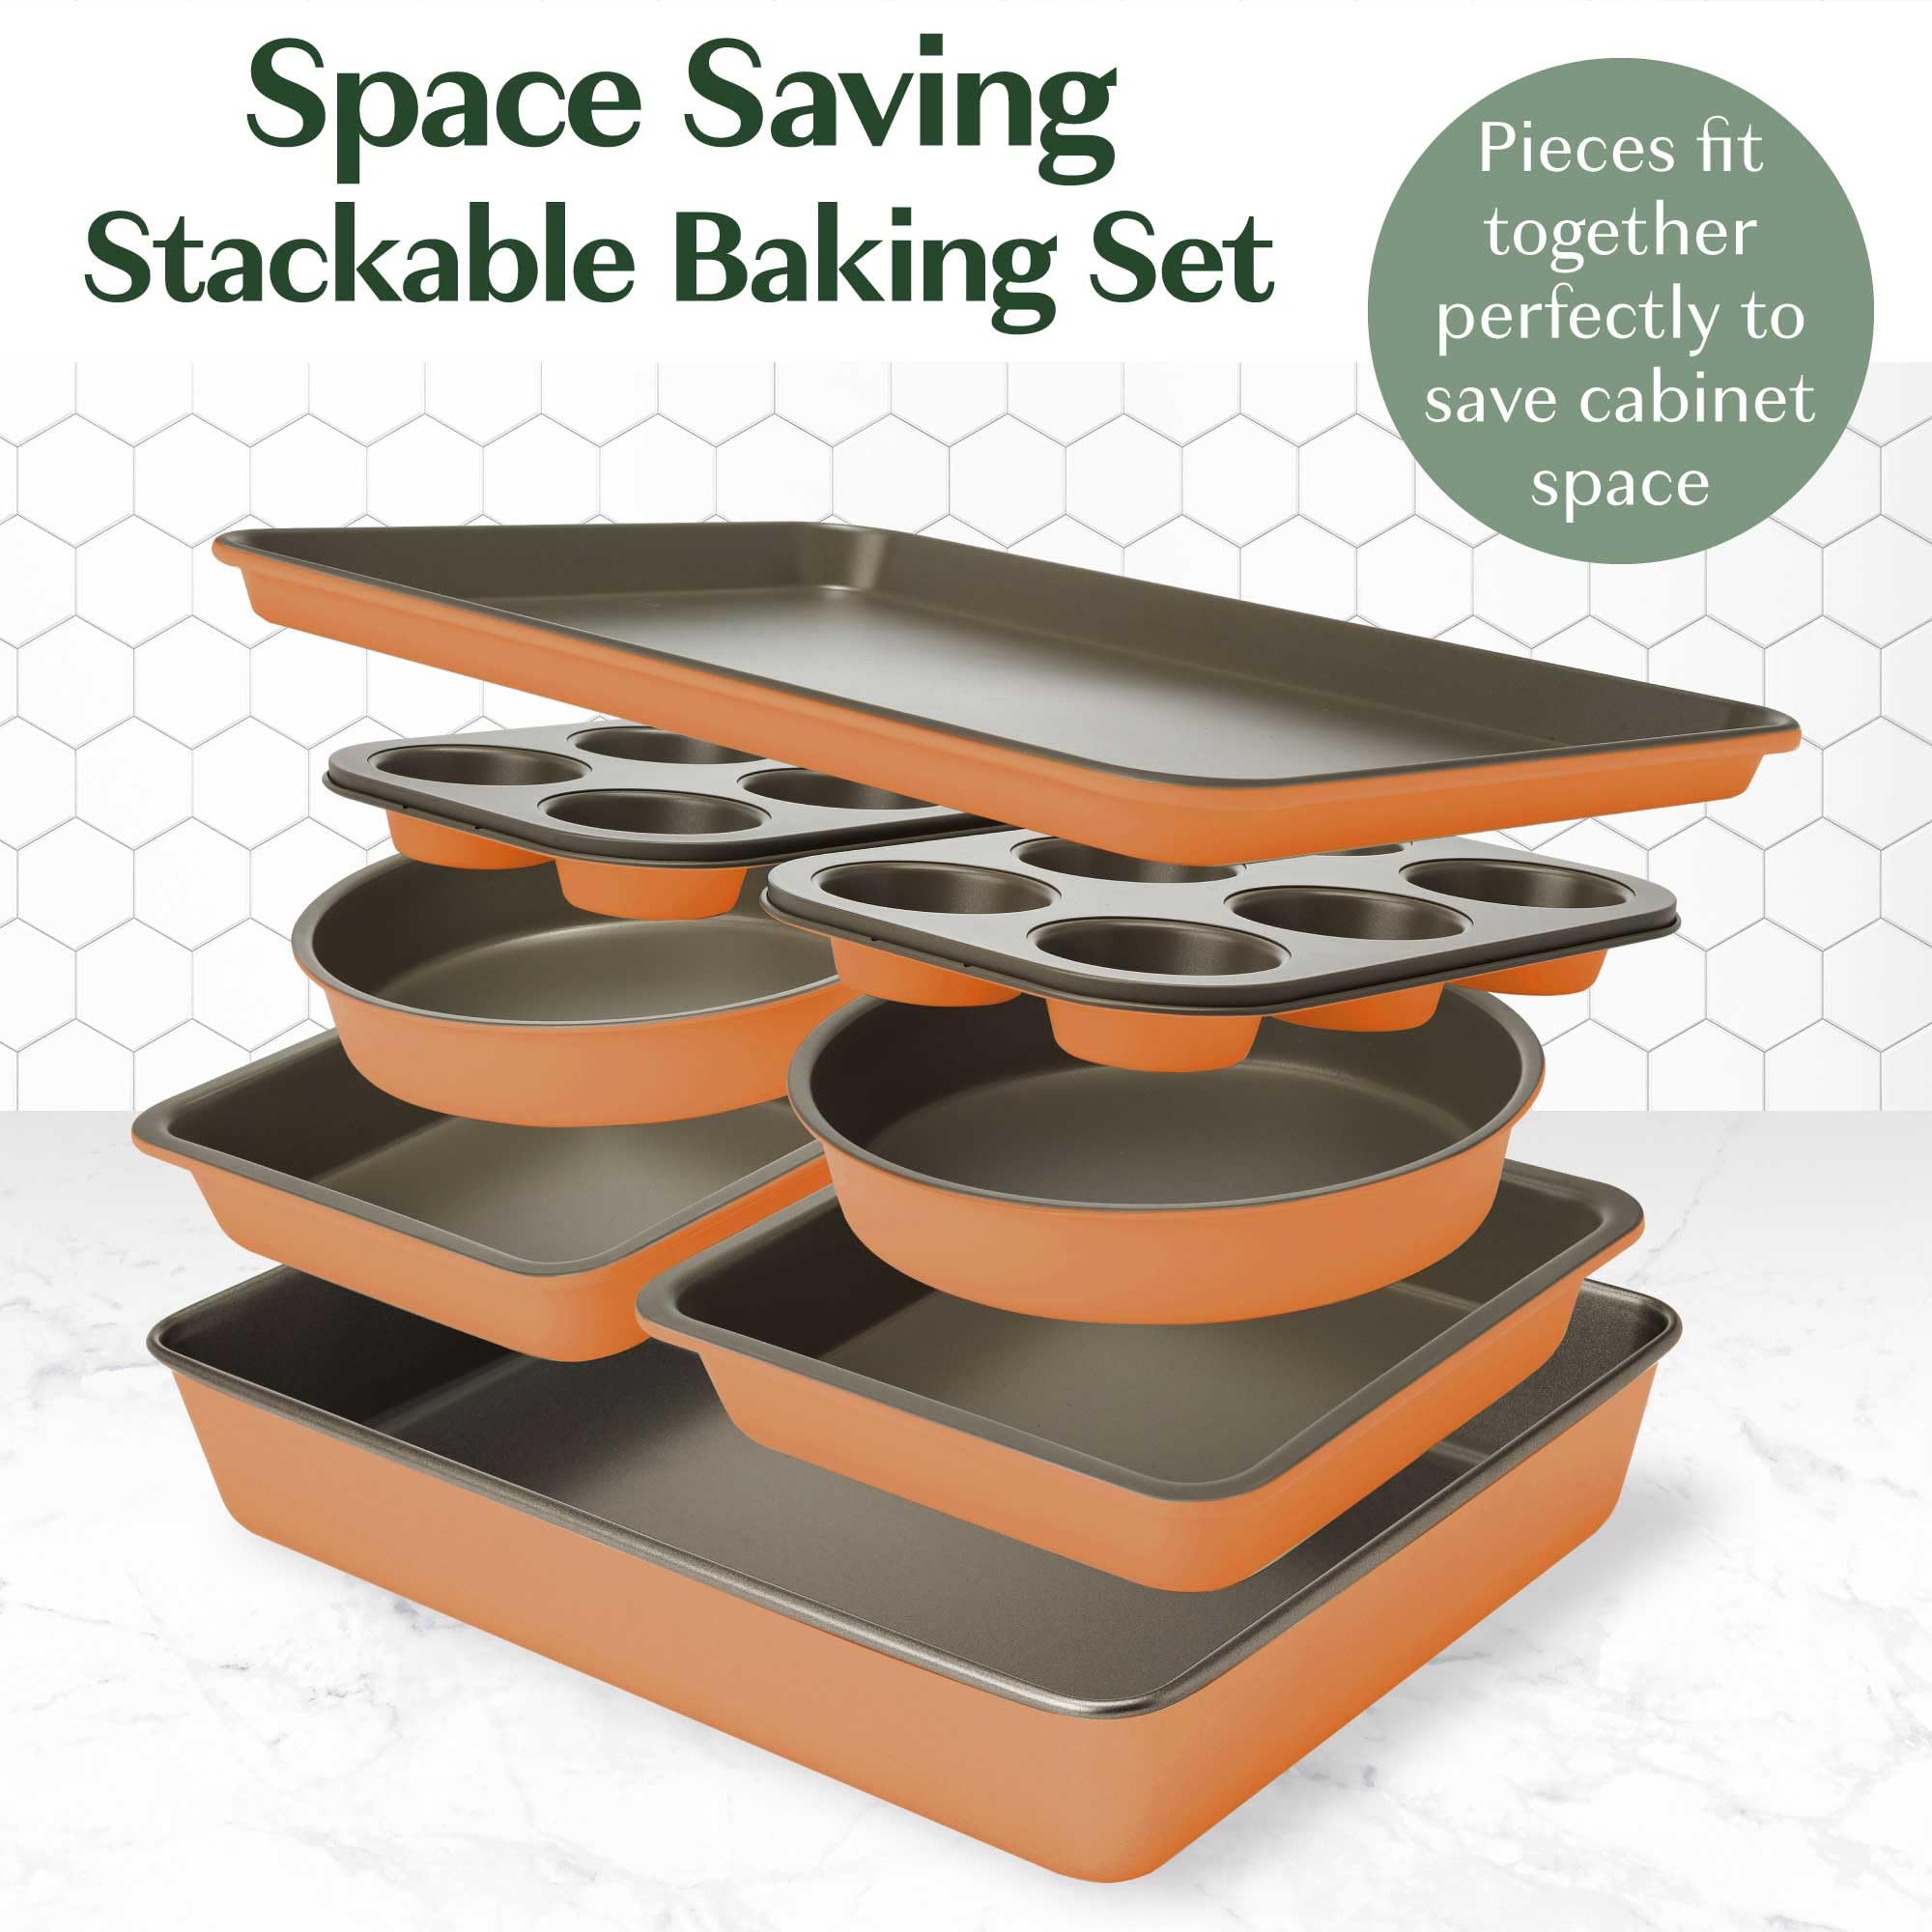 Goodful All-In-One Nonstick Bakeware Set, Stackable and Space Saving Design includes Round and Square Pans, Muffin Pans, Cookie Sheet and Roaster, Dishwasher Safe, 8-Piece, Terracotta